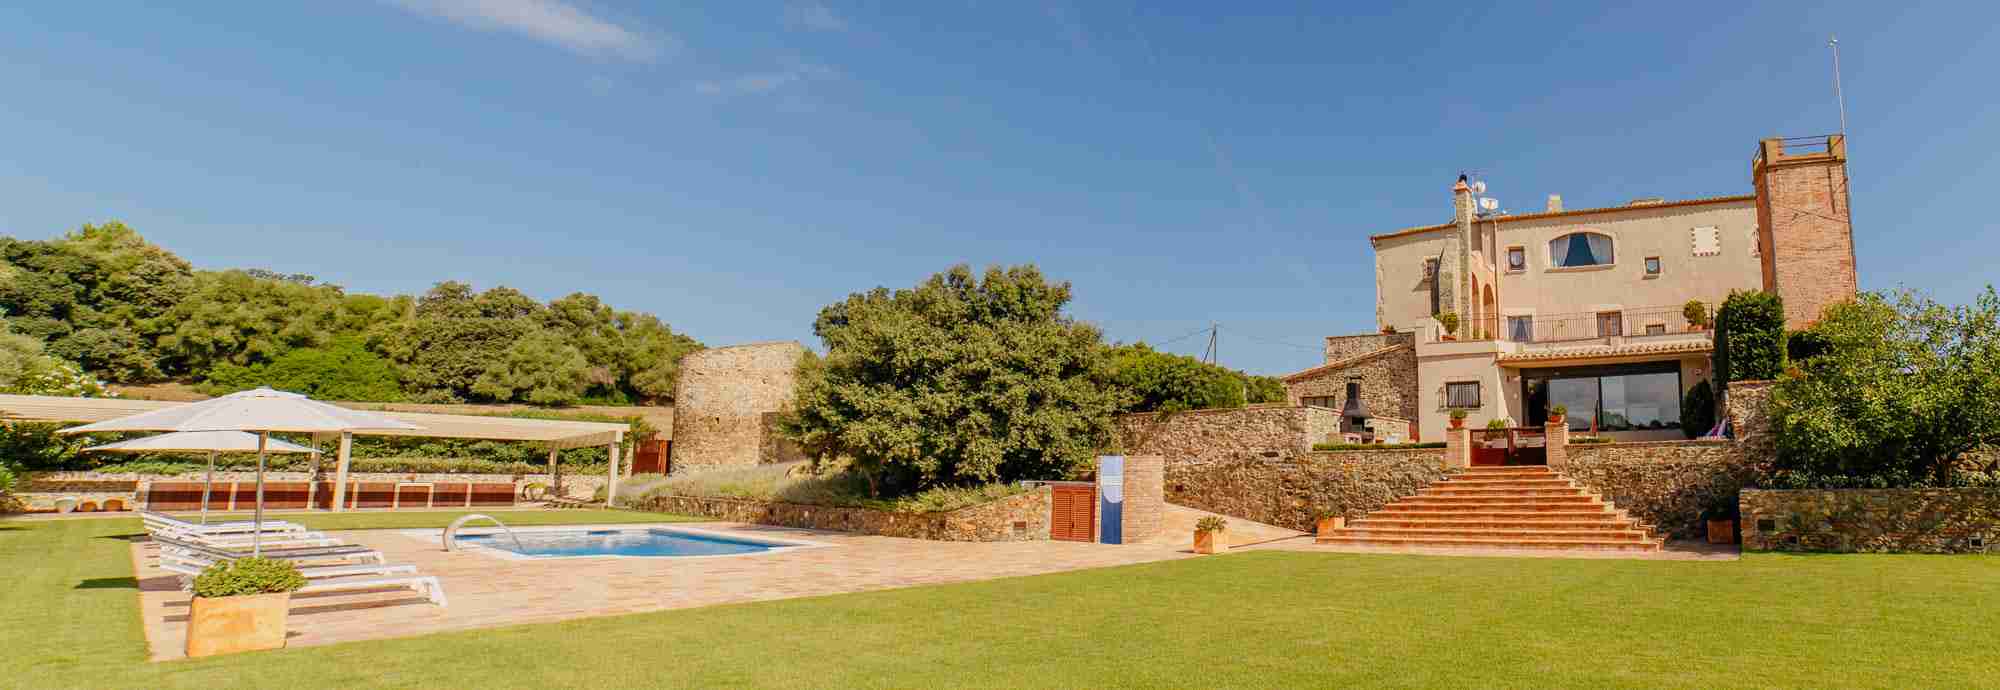 Exceptional, luxurious retreat for large families or events in Costa Brava